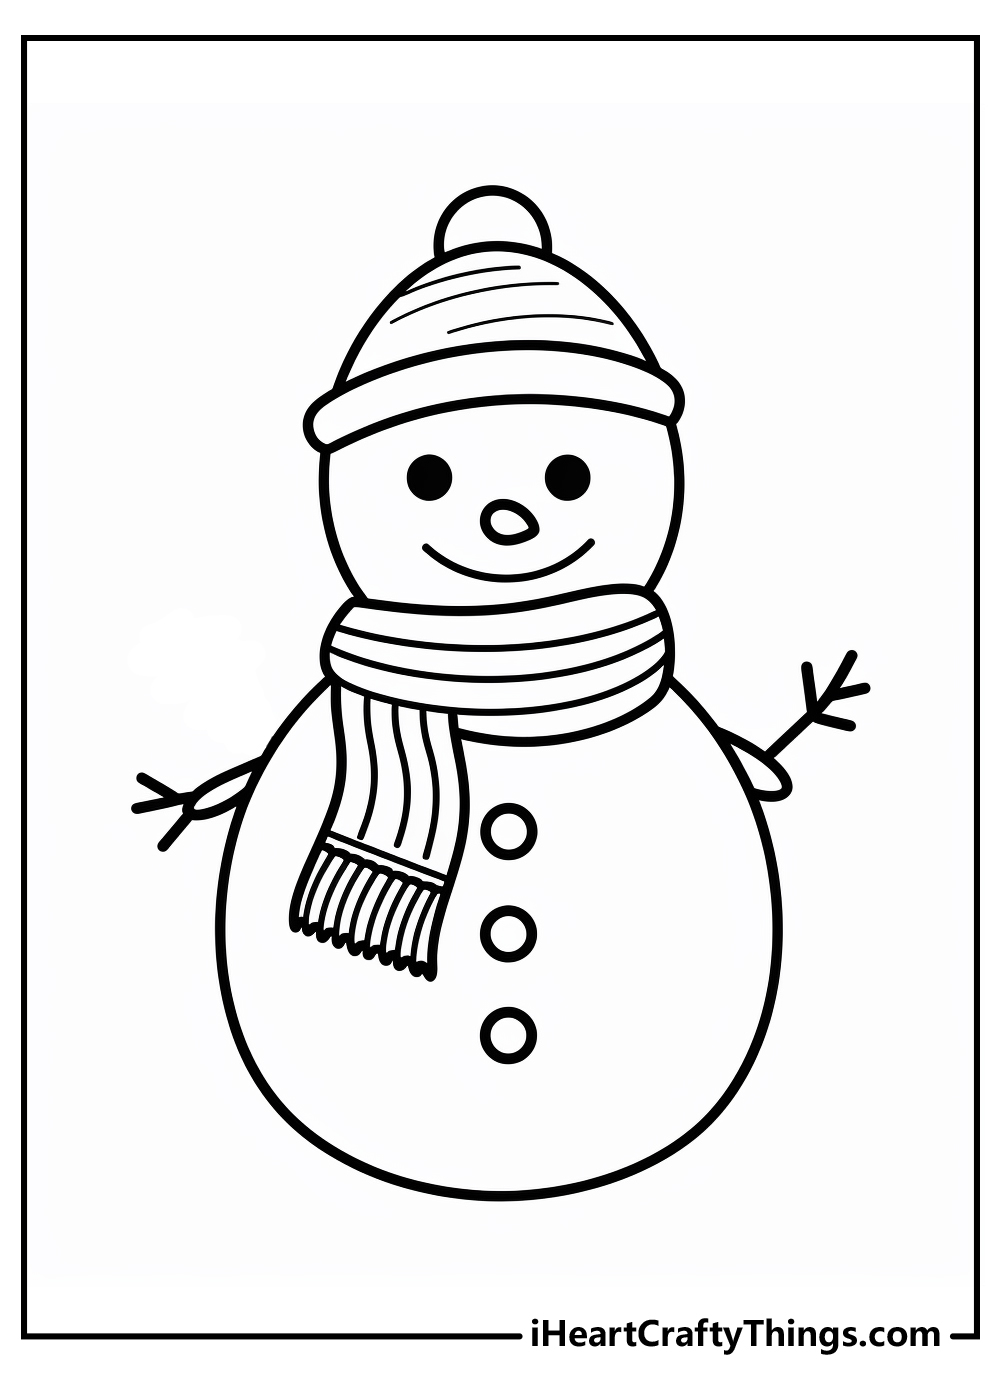 We're Drawing a Winter Snowman Today! (Amazing Tutorial for Small Kids!) -  Rainbow Printables